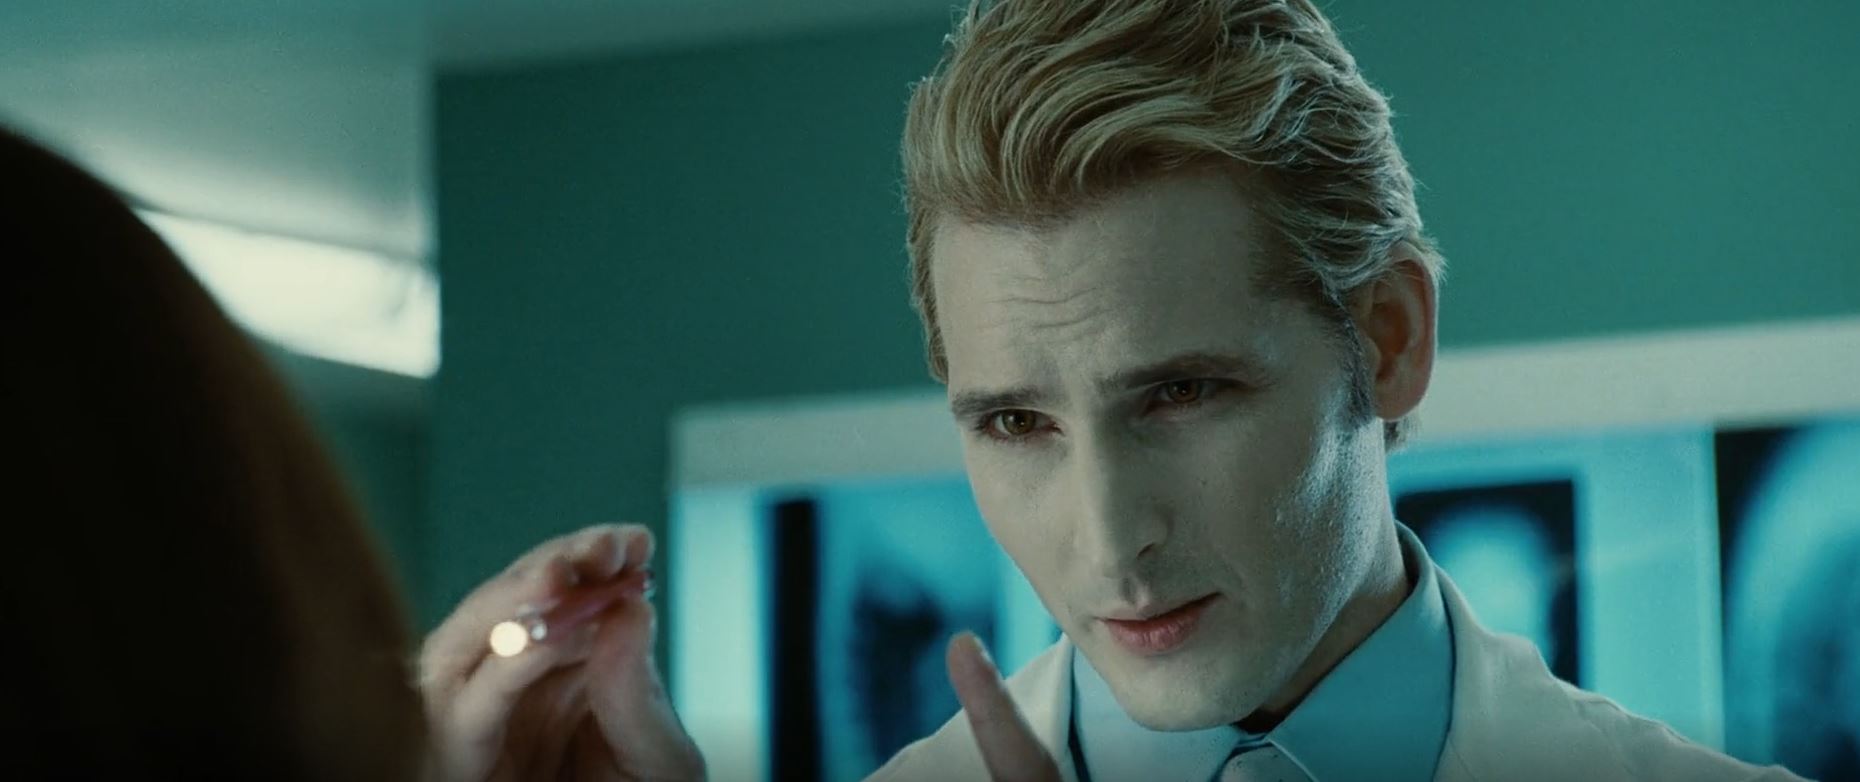 twilight’s carlisle cullen – biography, history, & character information